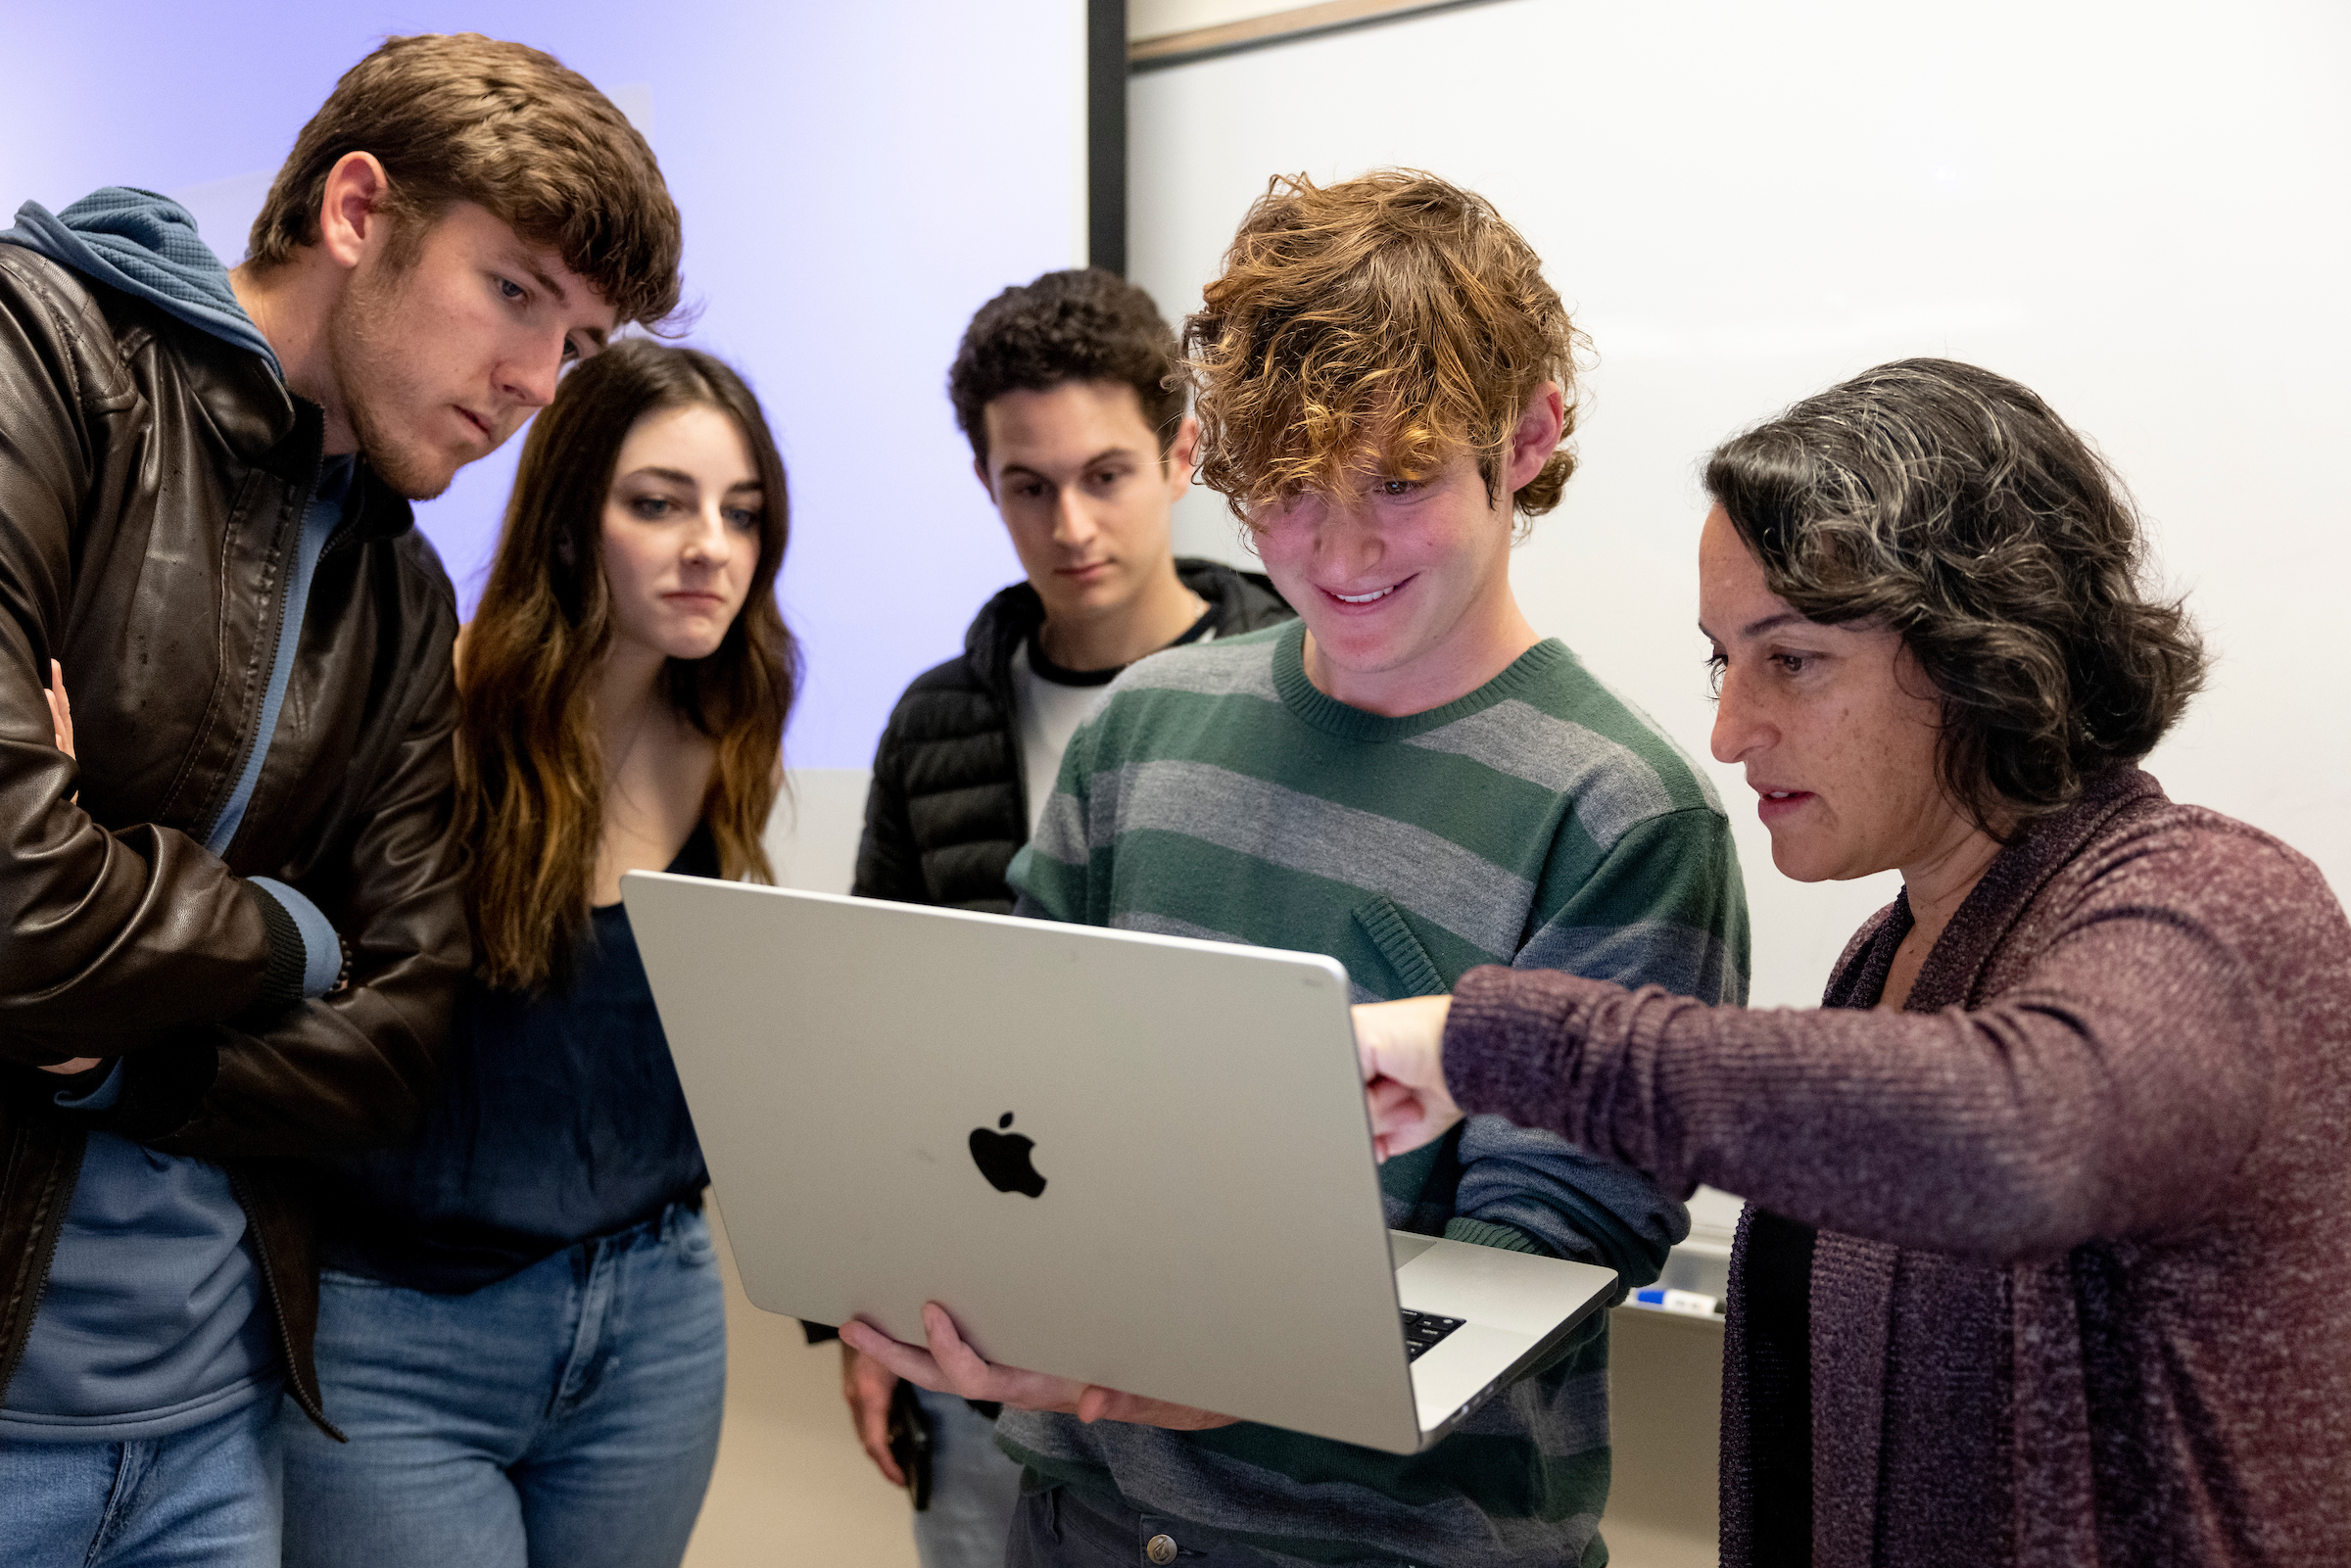 A group of students huddle around a laptop, held by a student in the middle. A professor looks at the laptop and points at the screen.